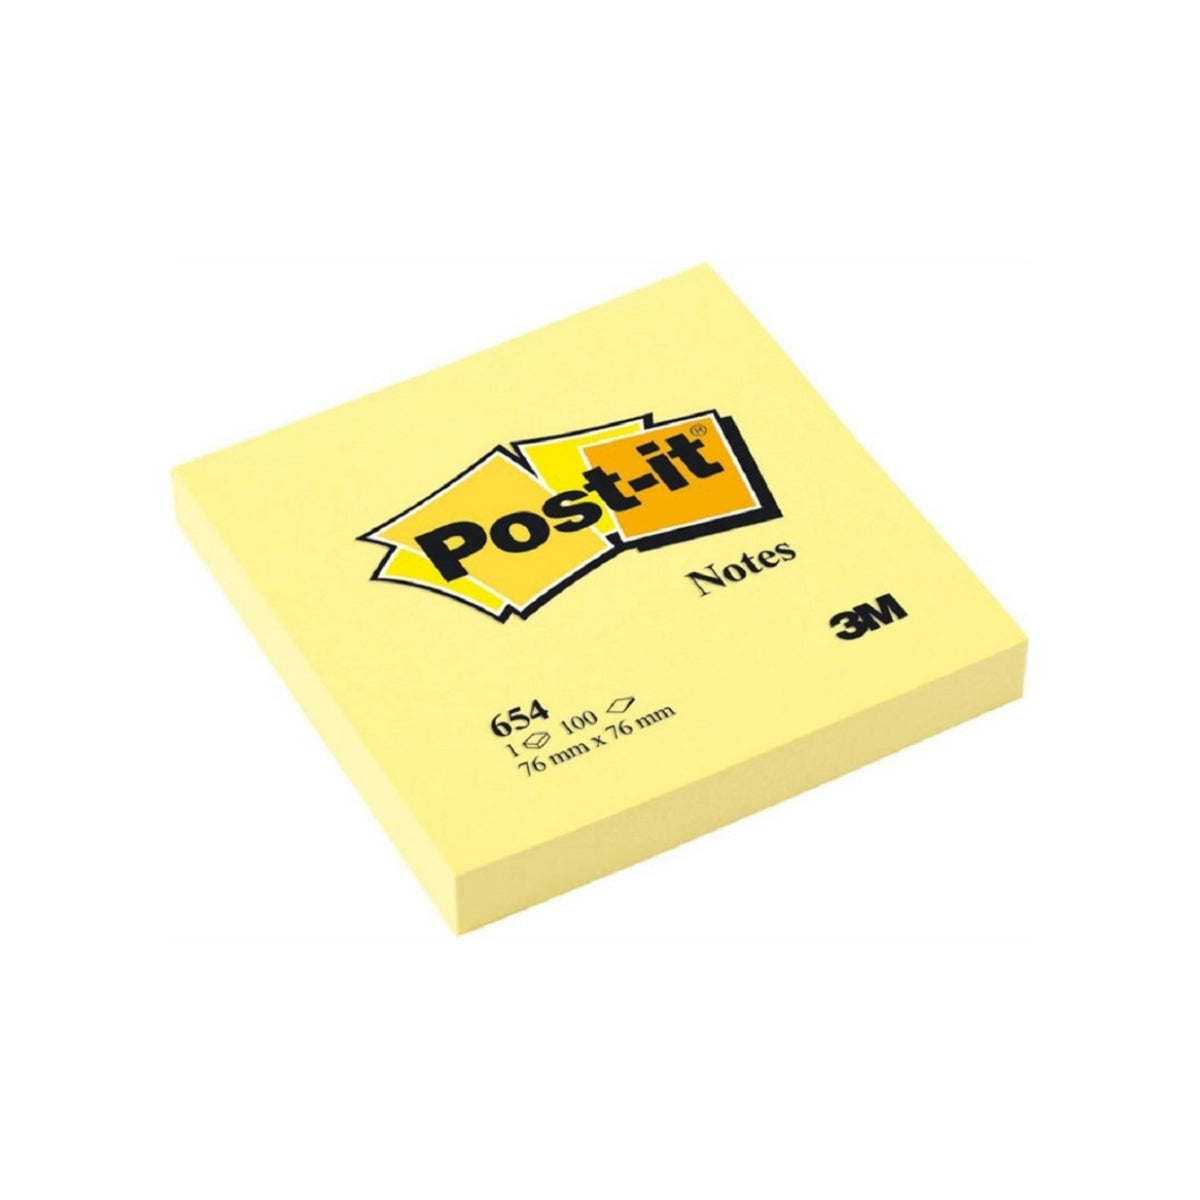 3M Post-it Notes 654, 3x3 inches, Canary Yellow